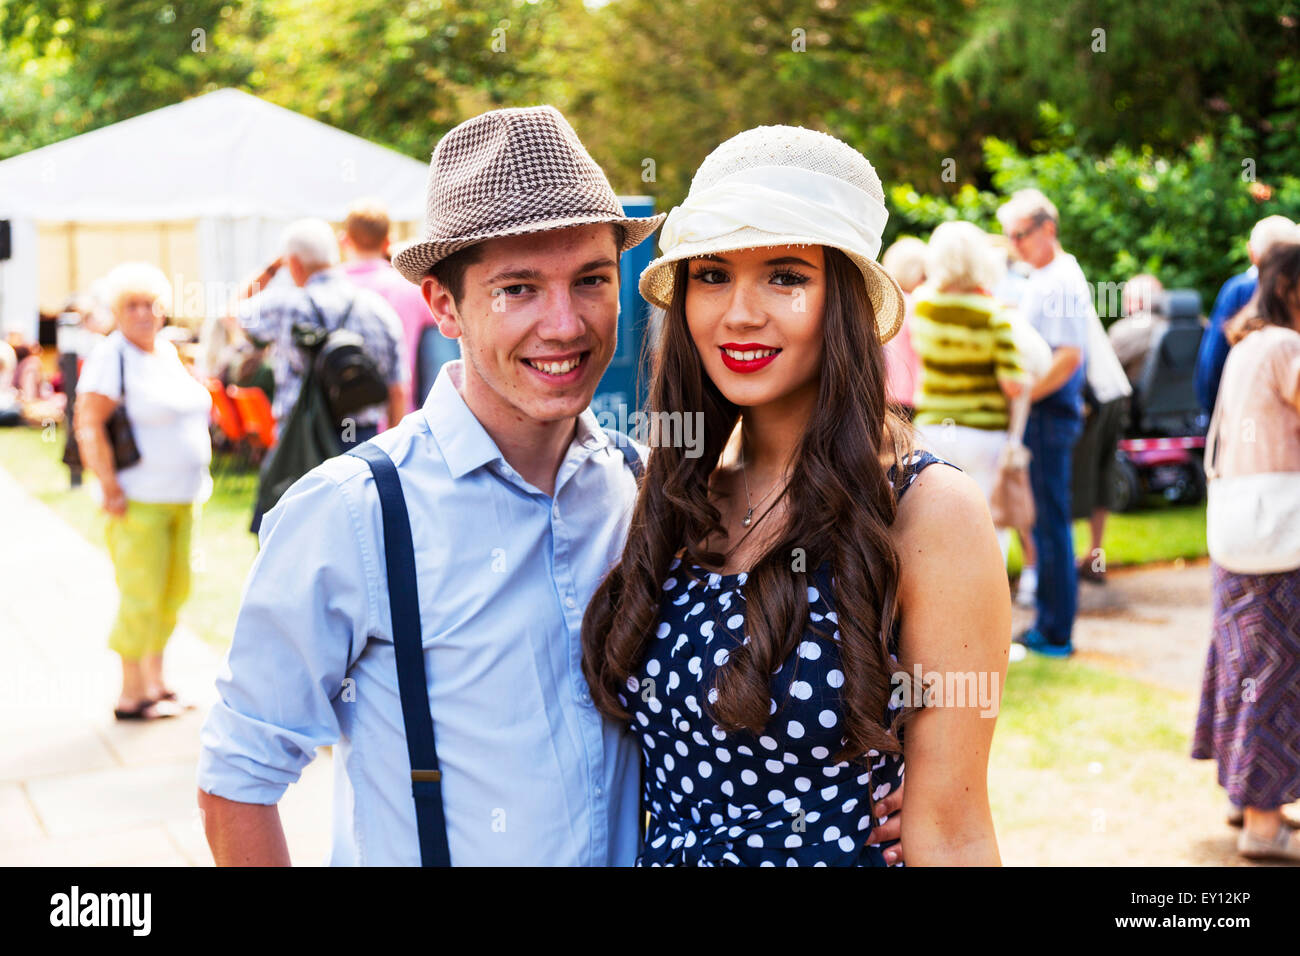 Young lovers looking cute together wearing hats braces pretty girl young woman handsome man Stock Photo